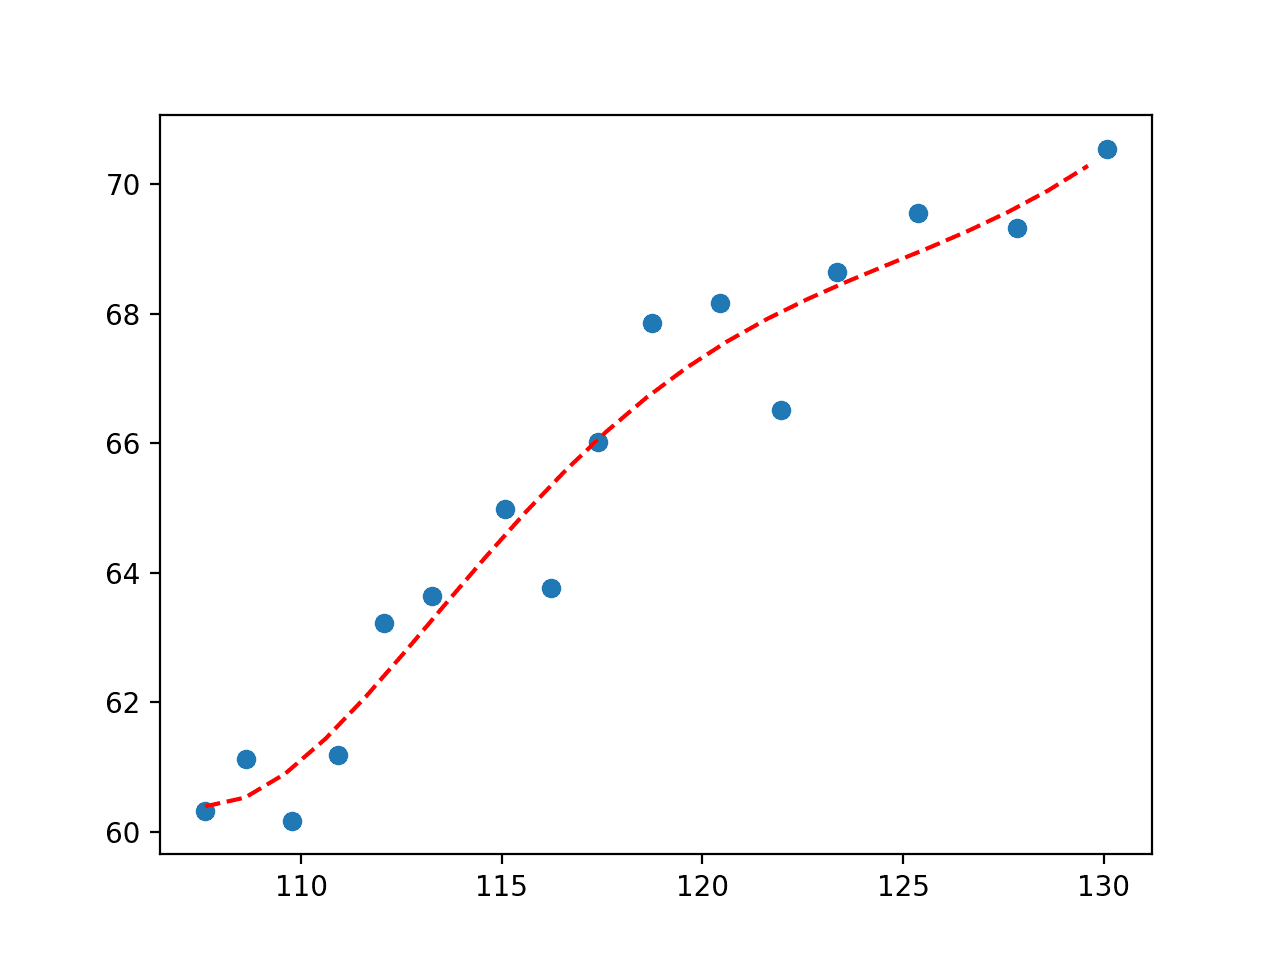 Plot of Fifth Degree Polynomial Fit to Economic Dataset